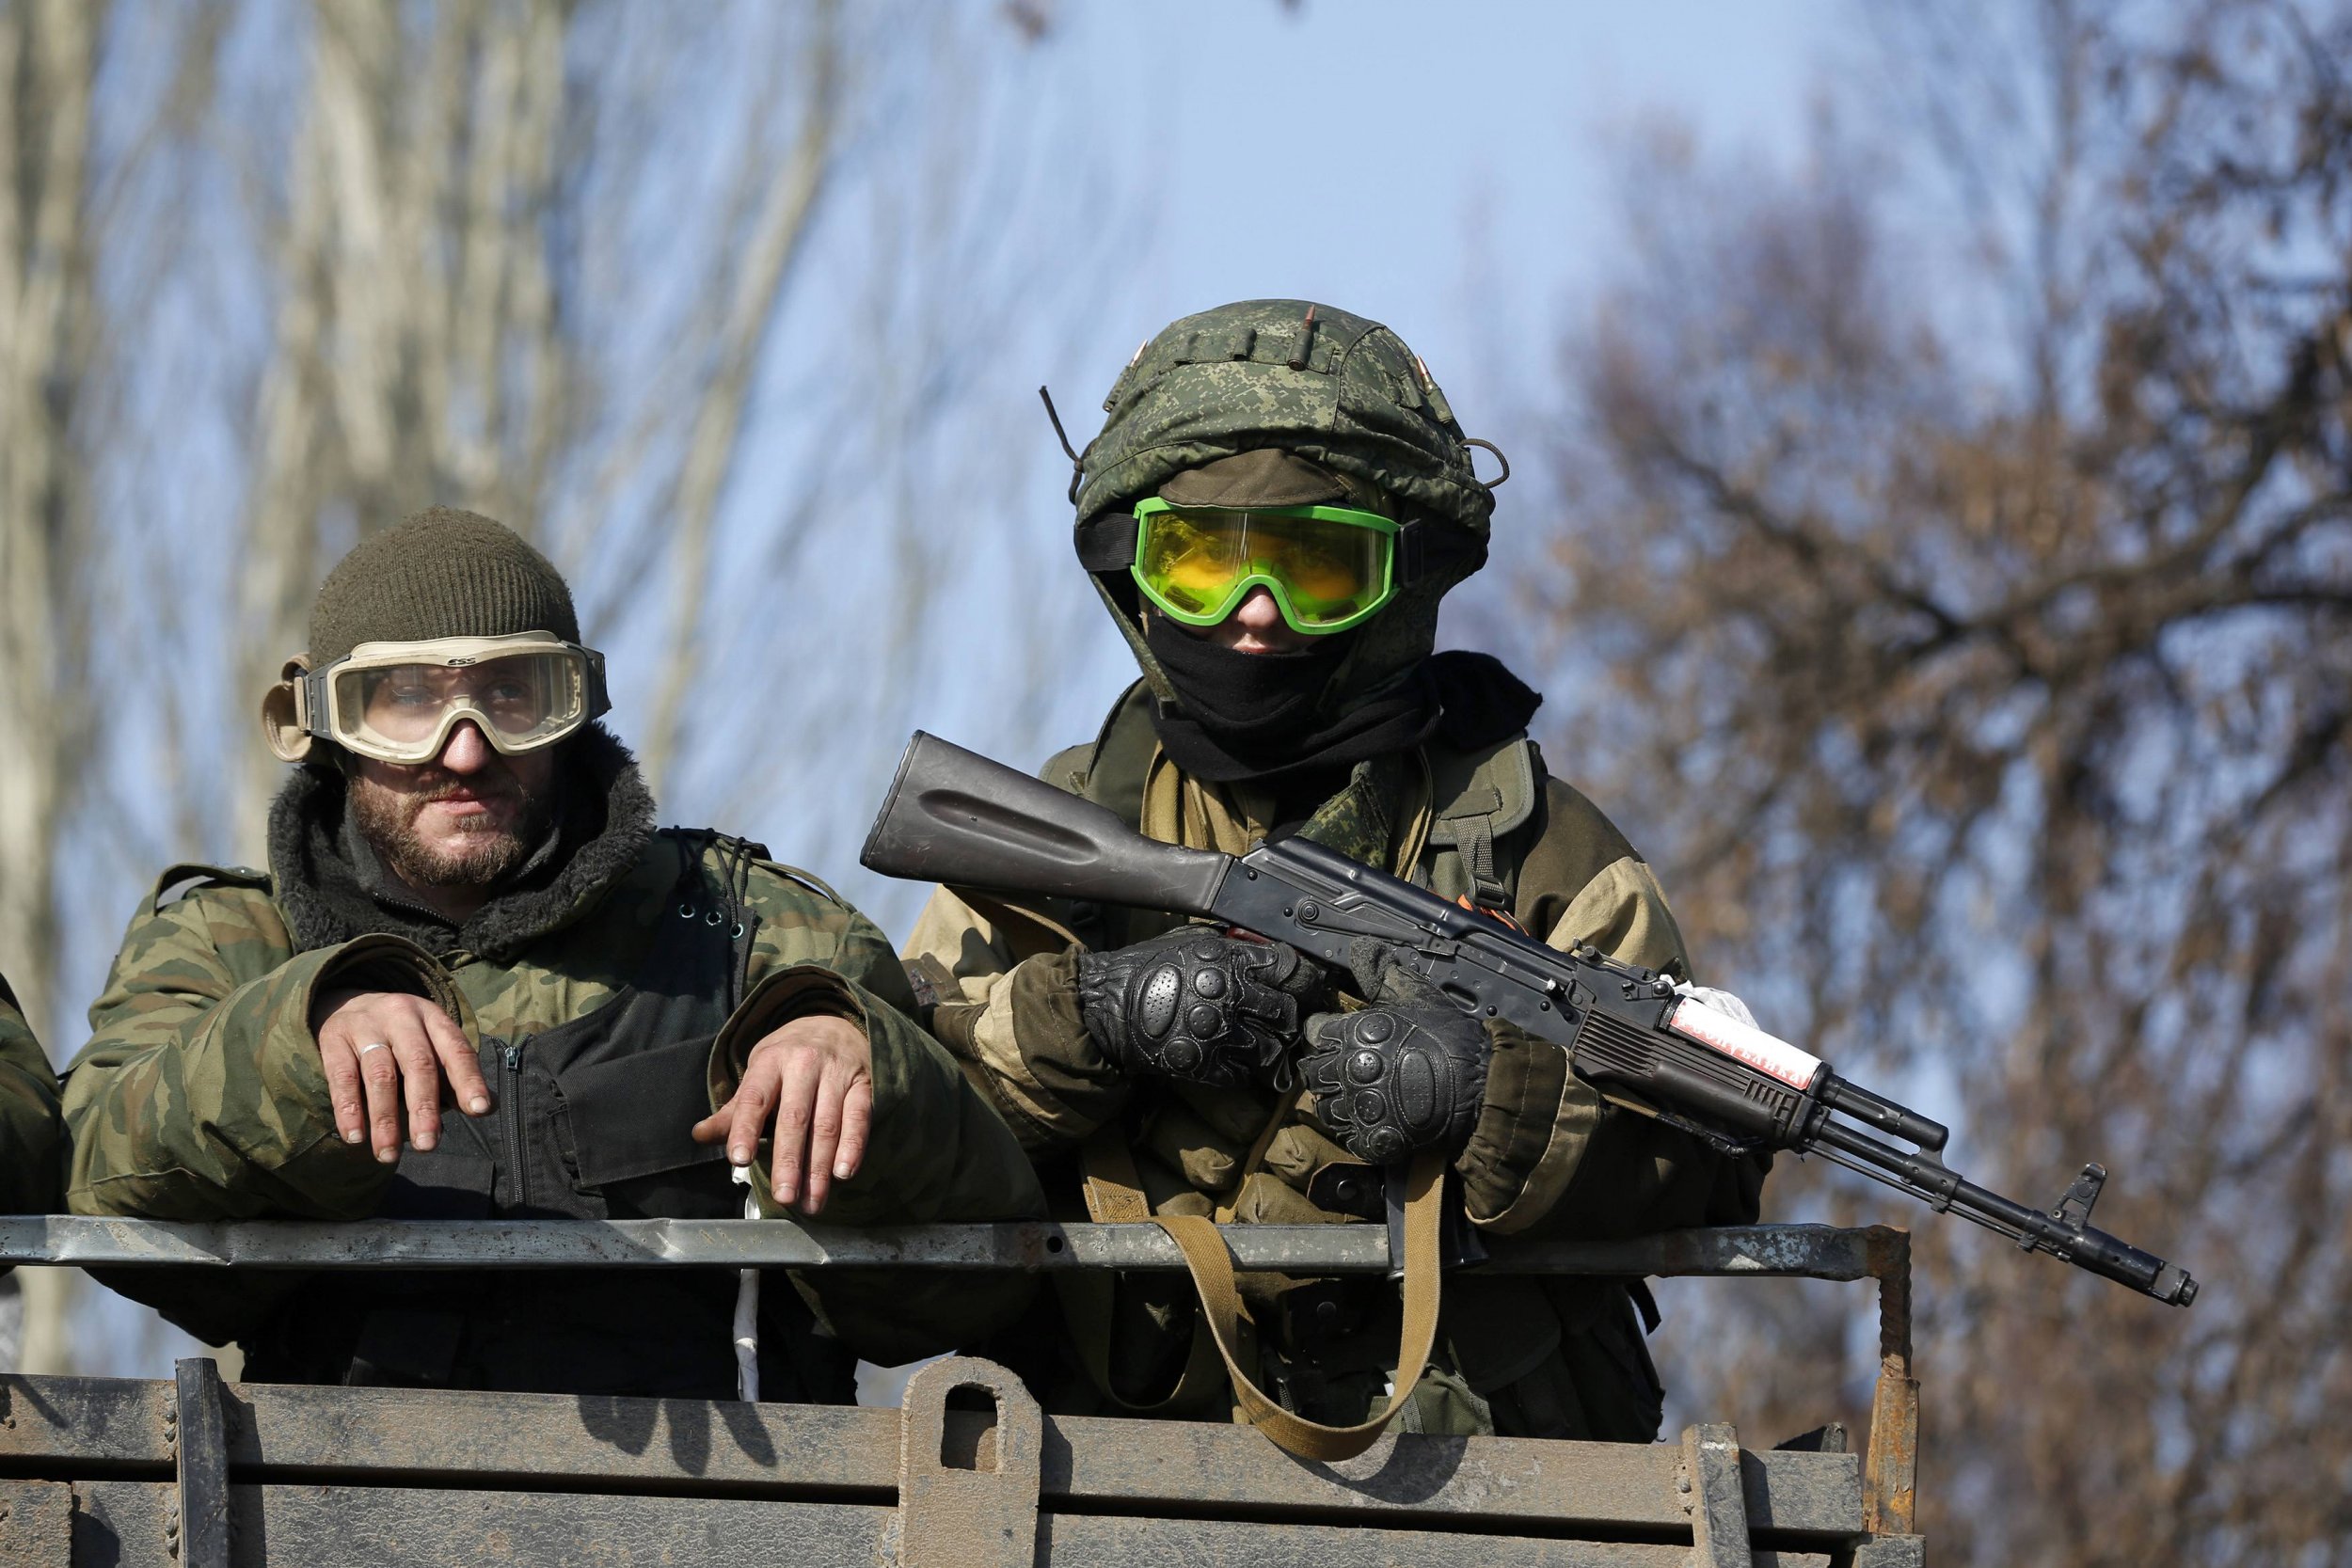 Rebels Fight For Territory Ahead of Ukraine Ceasefire, Kiev Military Says